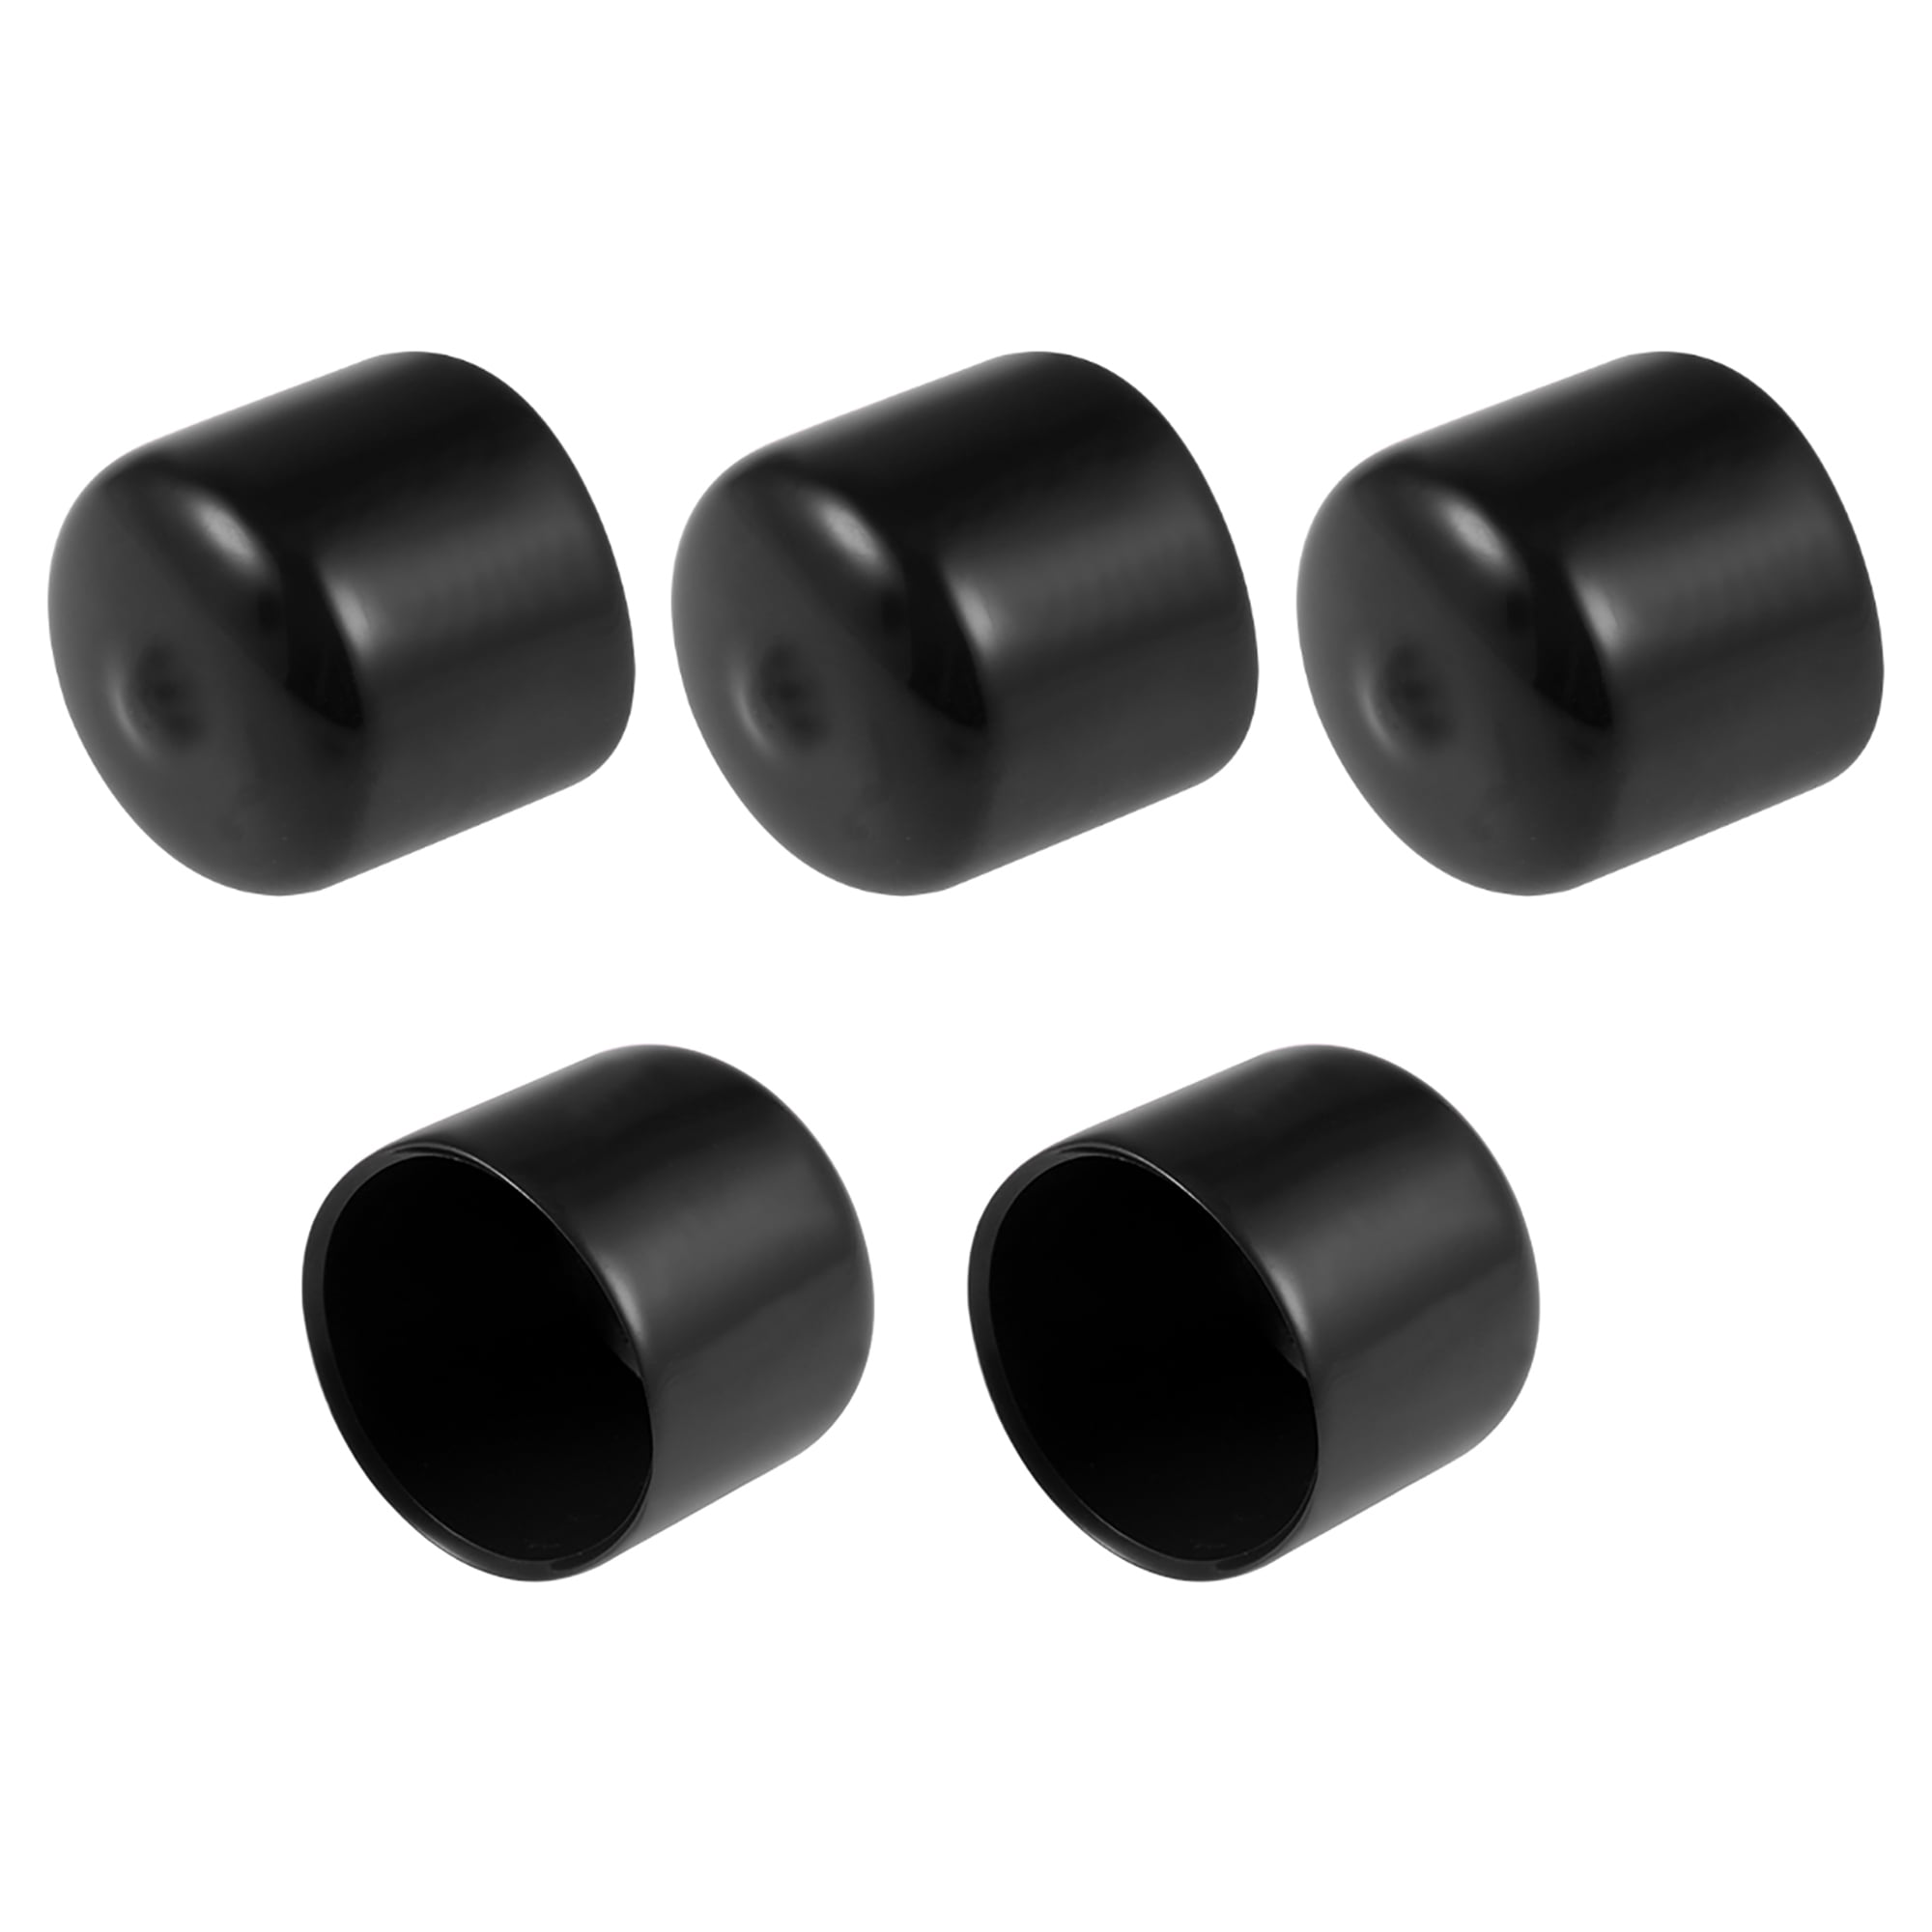 Bolt Covers.Thread Protection 100 Pieces 1/4" Vinyl Tube Caps,Tubing End Caps 